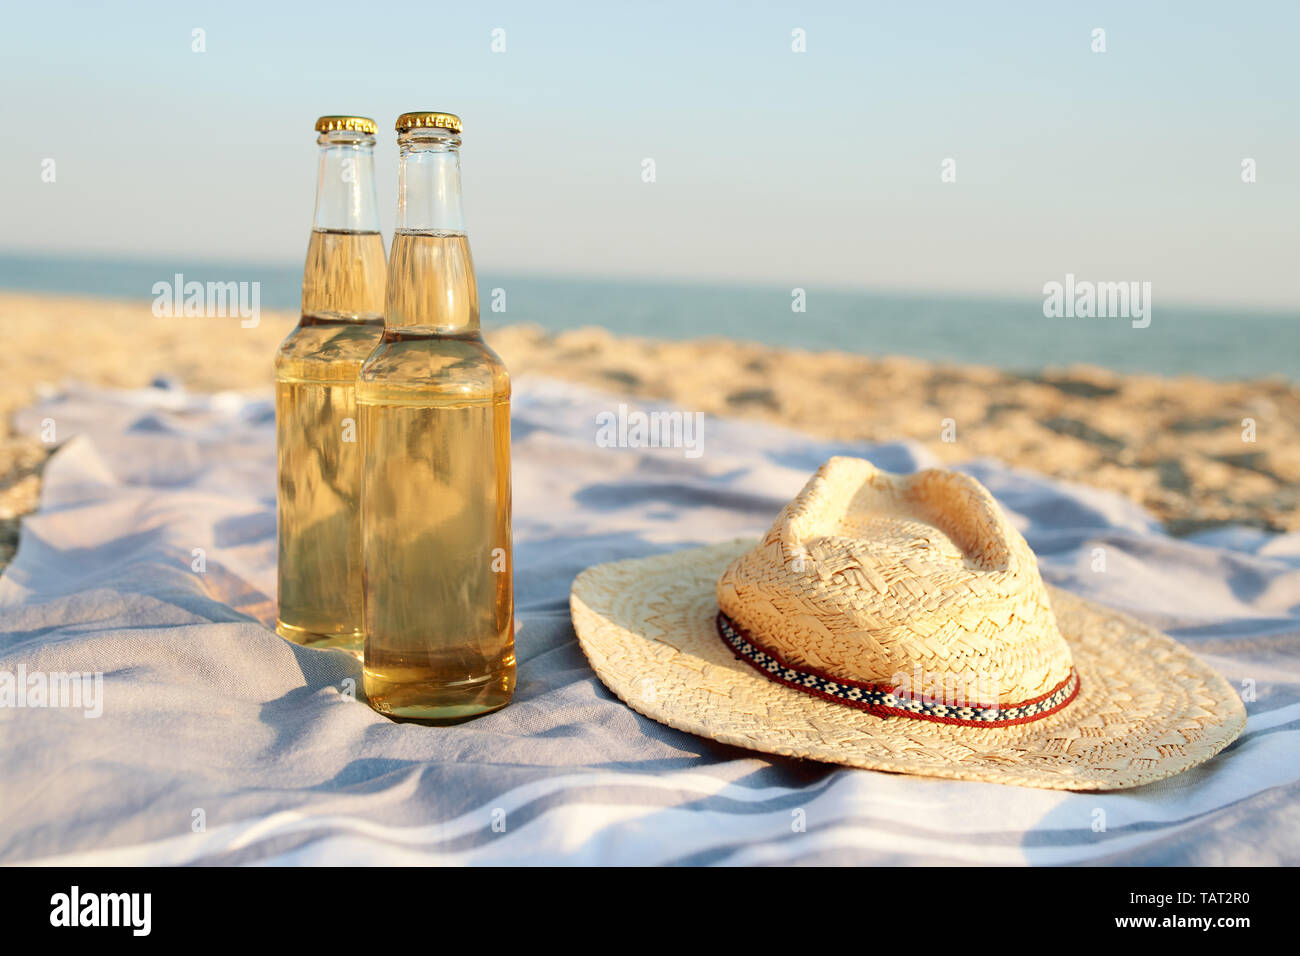 Closeup of two beer glass bottles on sandy tropical beach towel near straw hat. Blue ocean lagoon on background. Refreshing beverage on hot summer day Stock Photo